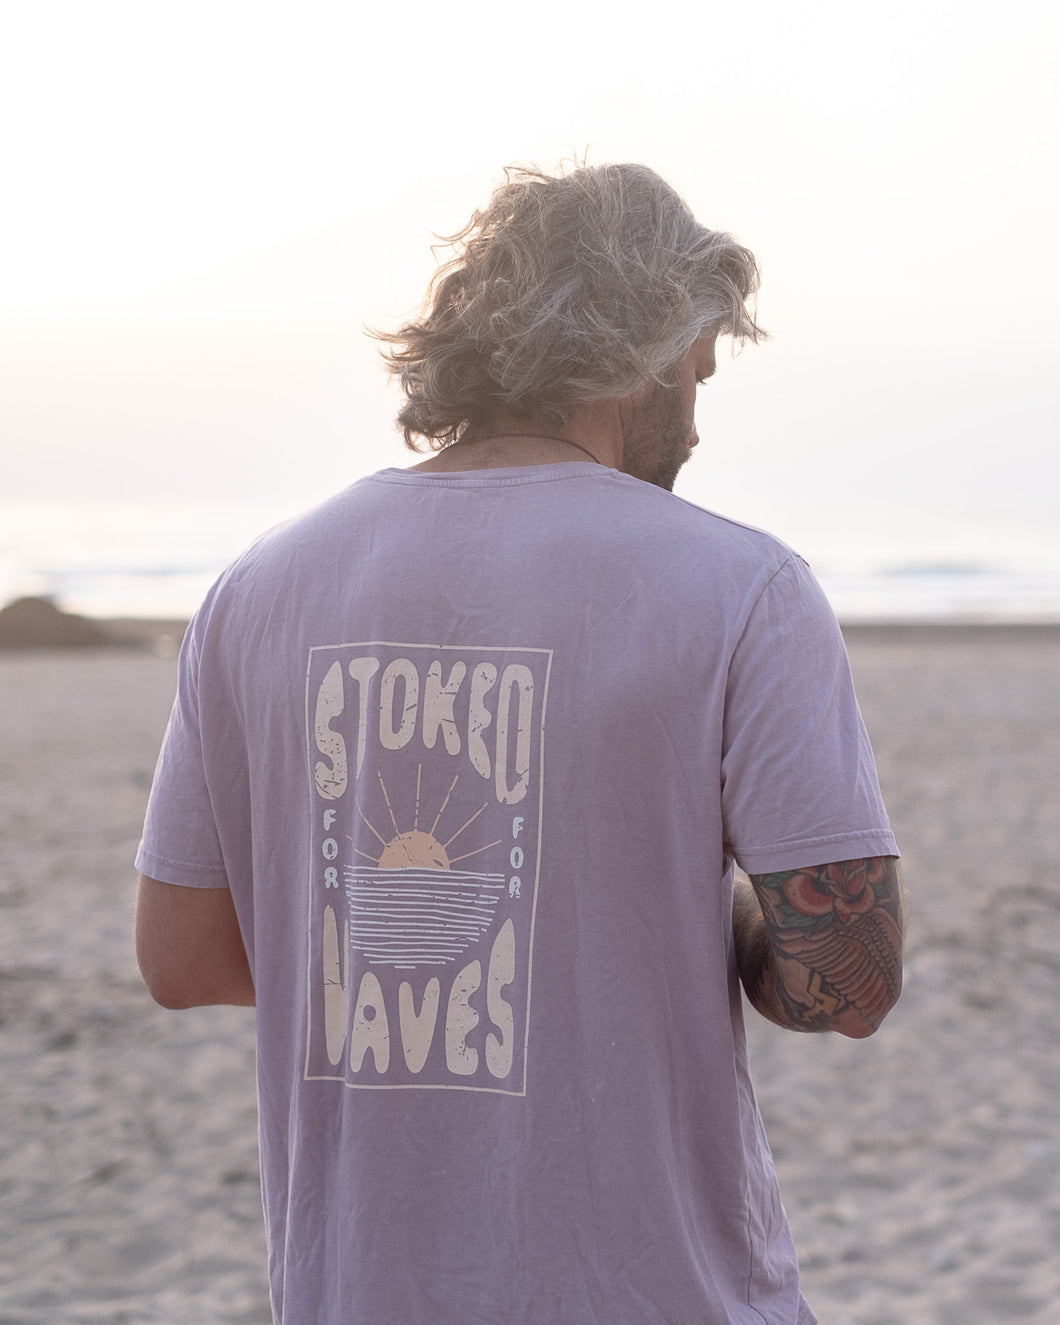 STOKED FOR WAVES TEE